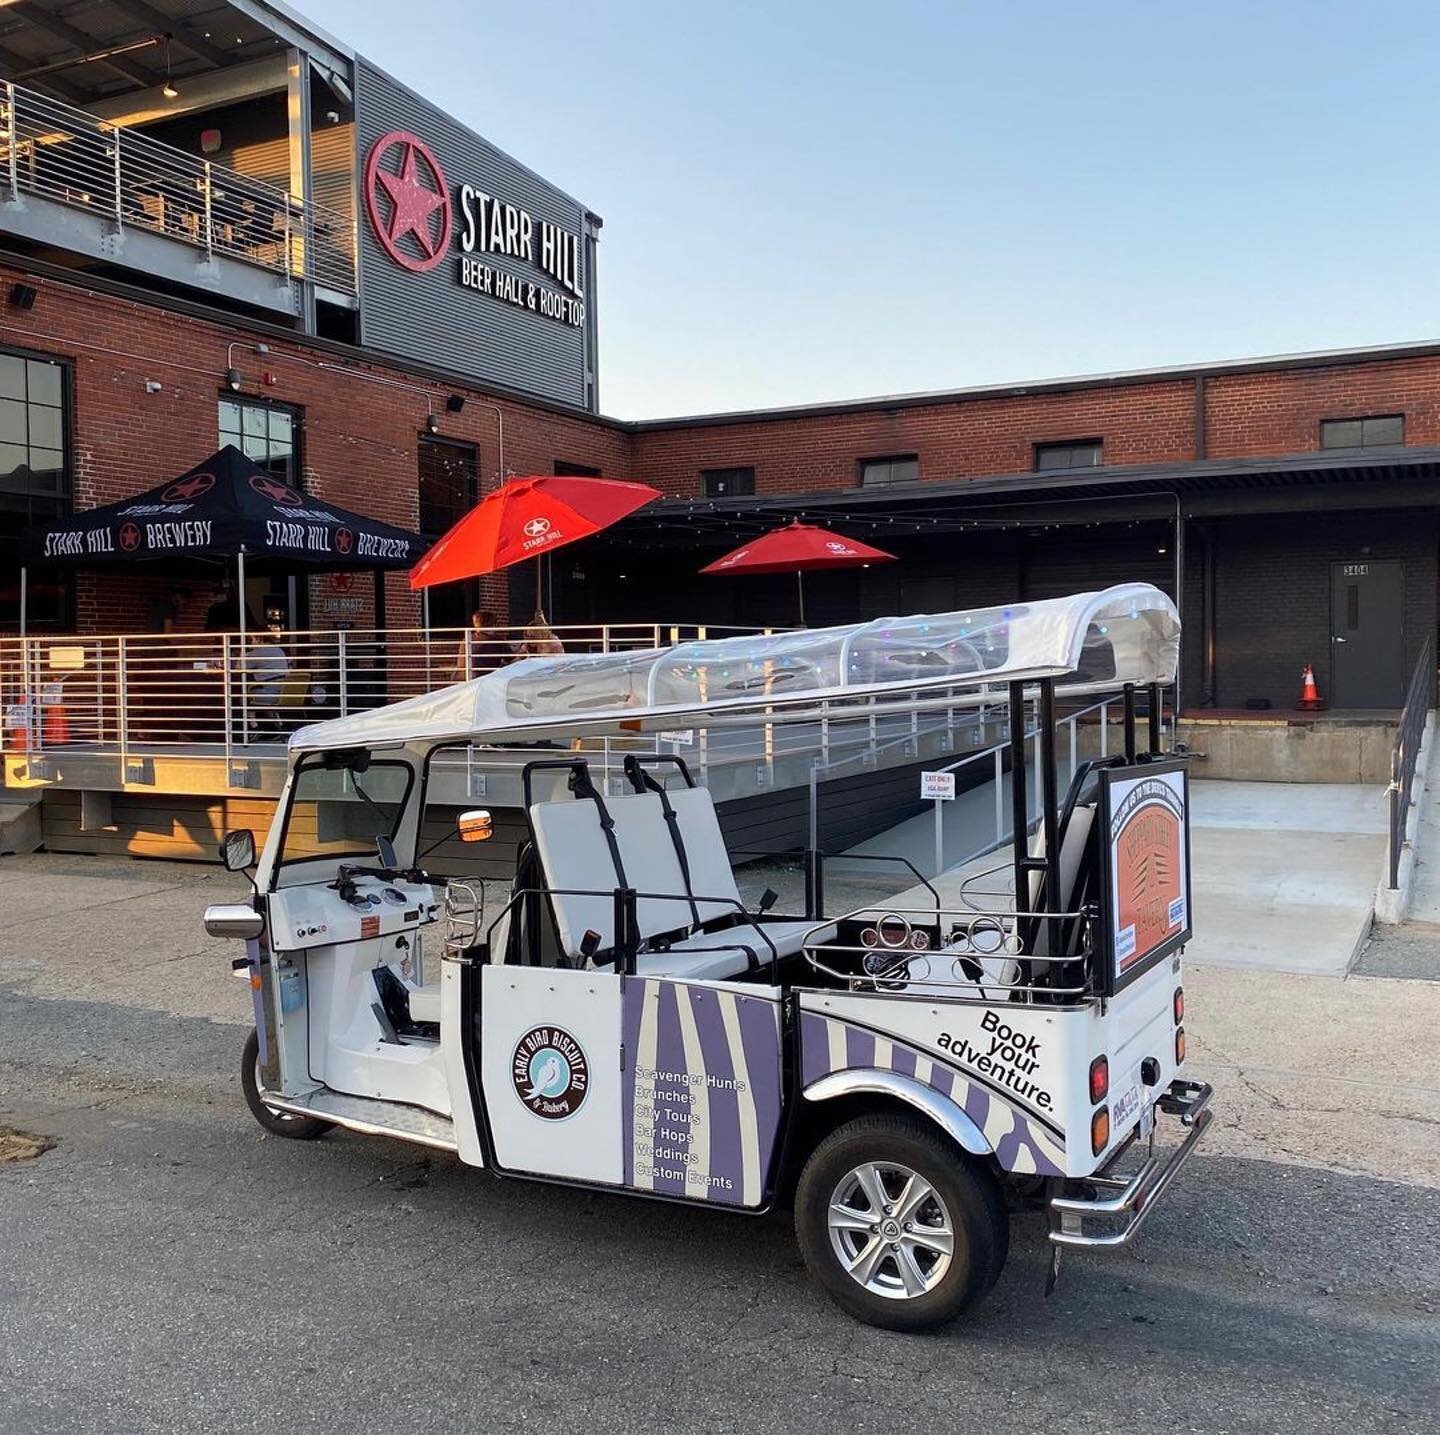 💥GIVEAWAY💥 Win an @rvatuktuk 3-hour Bar Hop Tour for you and 5 friends 🚍 AND gift cards to each of the 3 stops you&rsquo;ll hit along the way, including $20 to @starrhillrva, $20 to @beauvineburger, and $20 to @canonanddraw 🍔🍻

And in exciting n